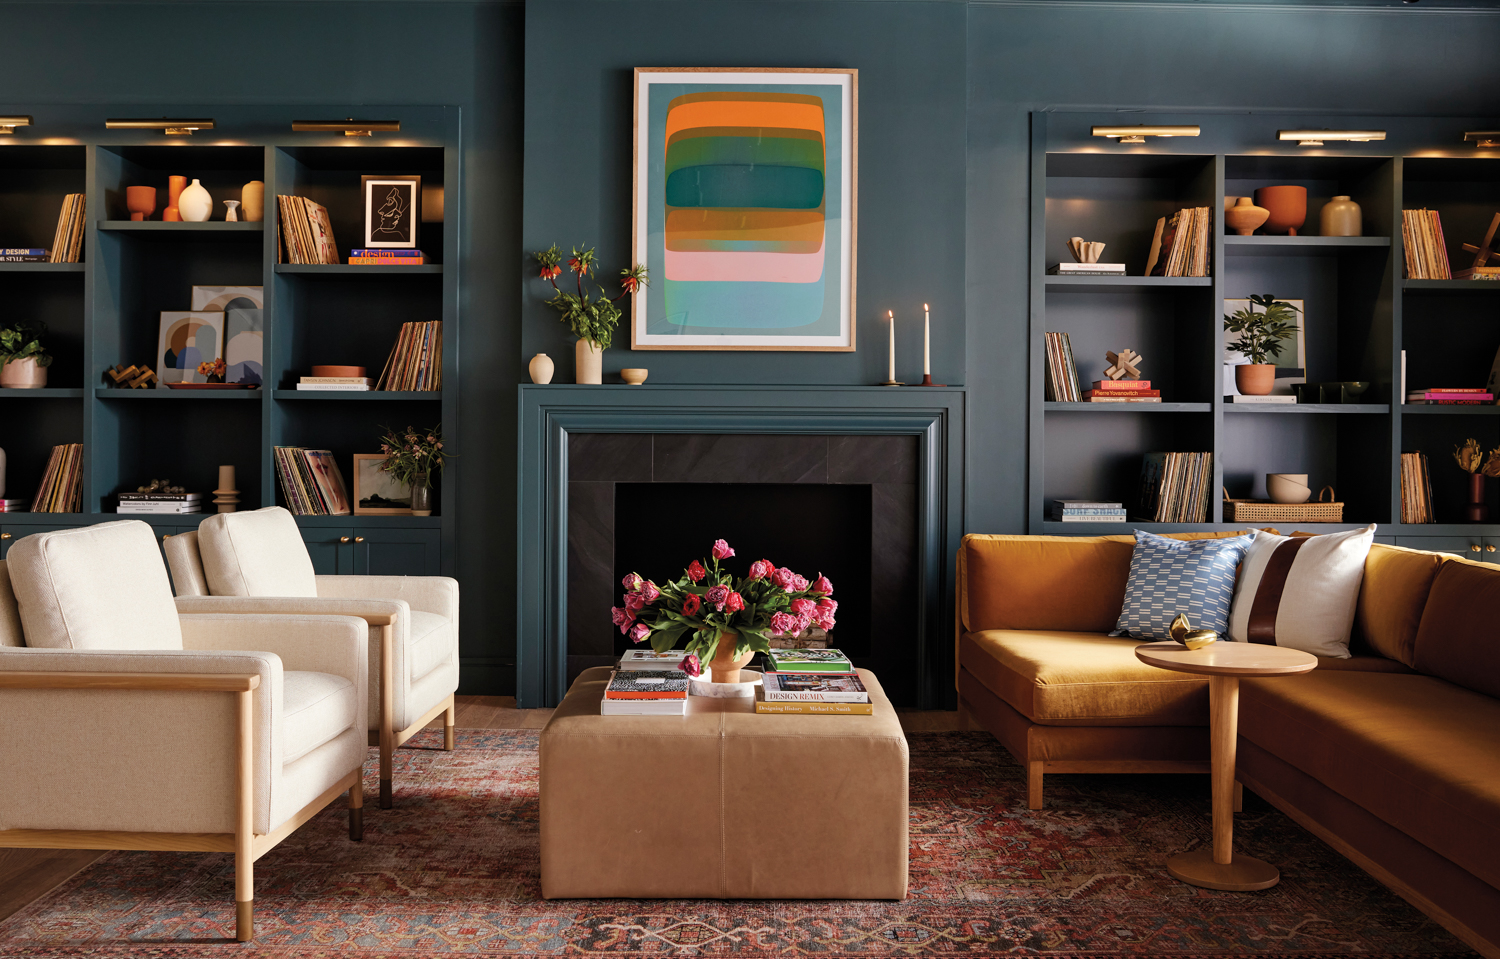 living room with dark-blue walls and a colorful abstract artwork above the fireplace between built-in bookshelves